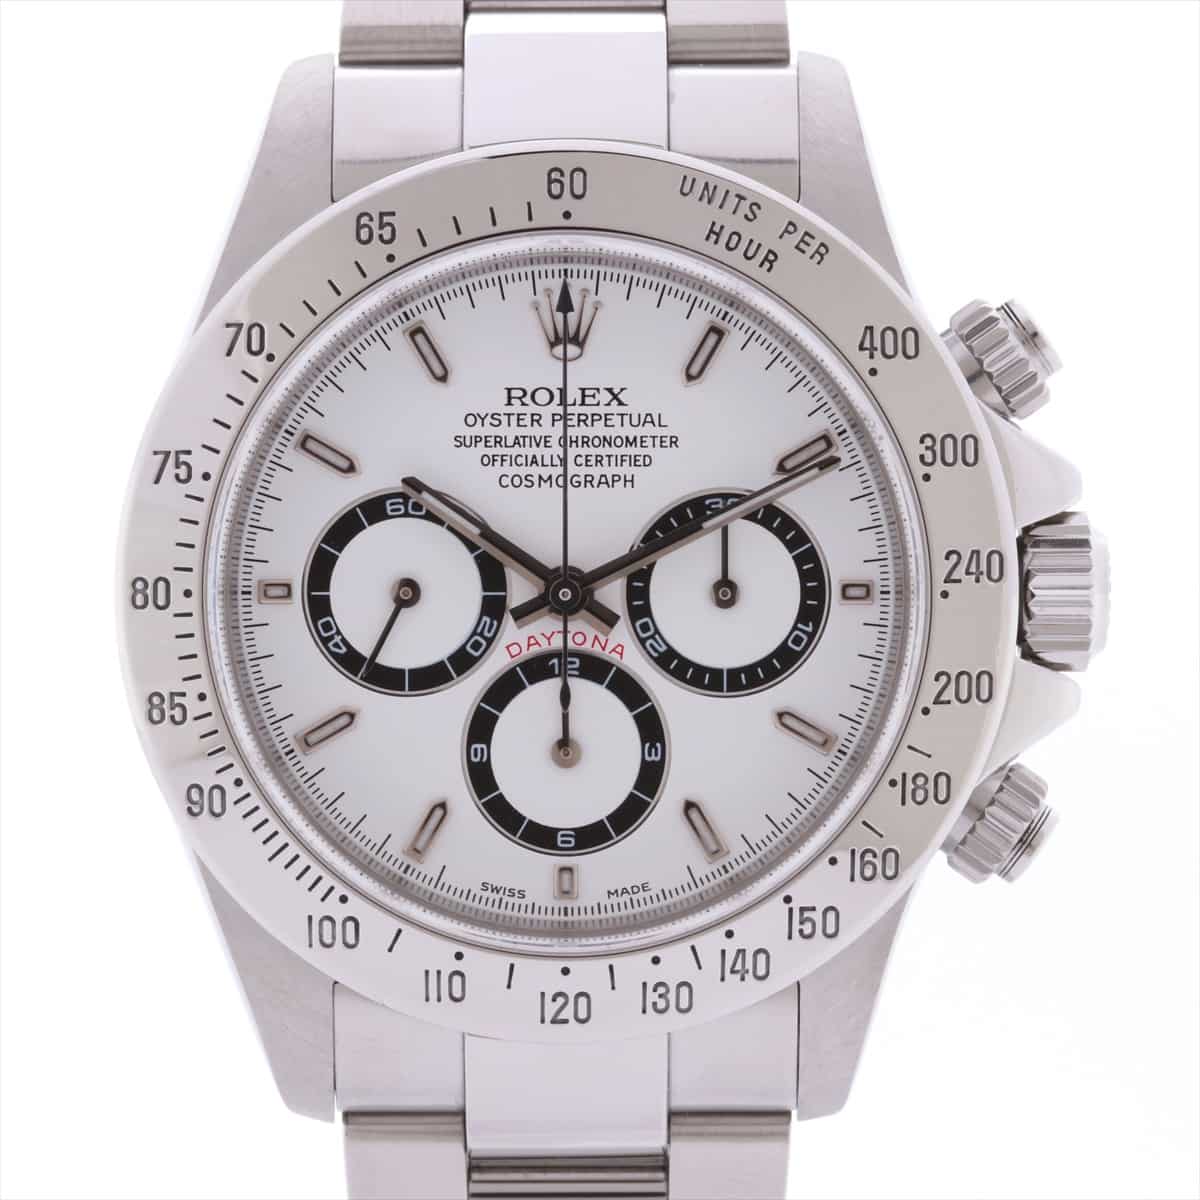 Rolex Daytona 16520 SS AT White-Face Extra Link 1